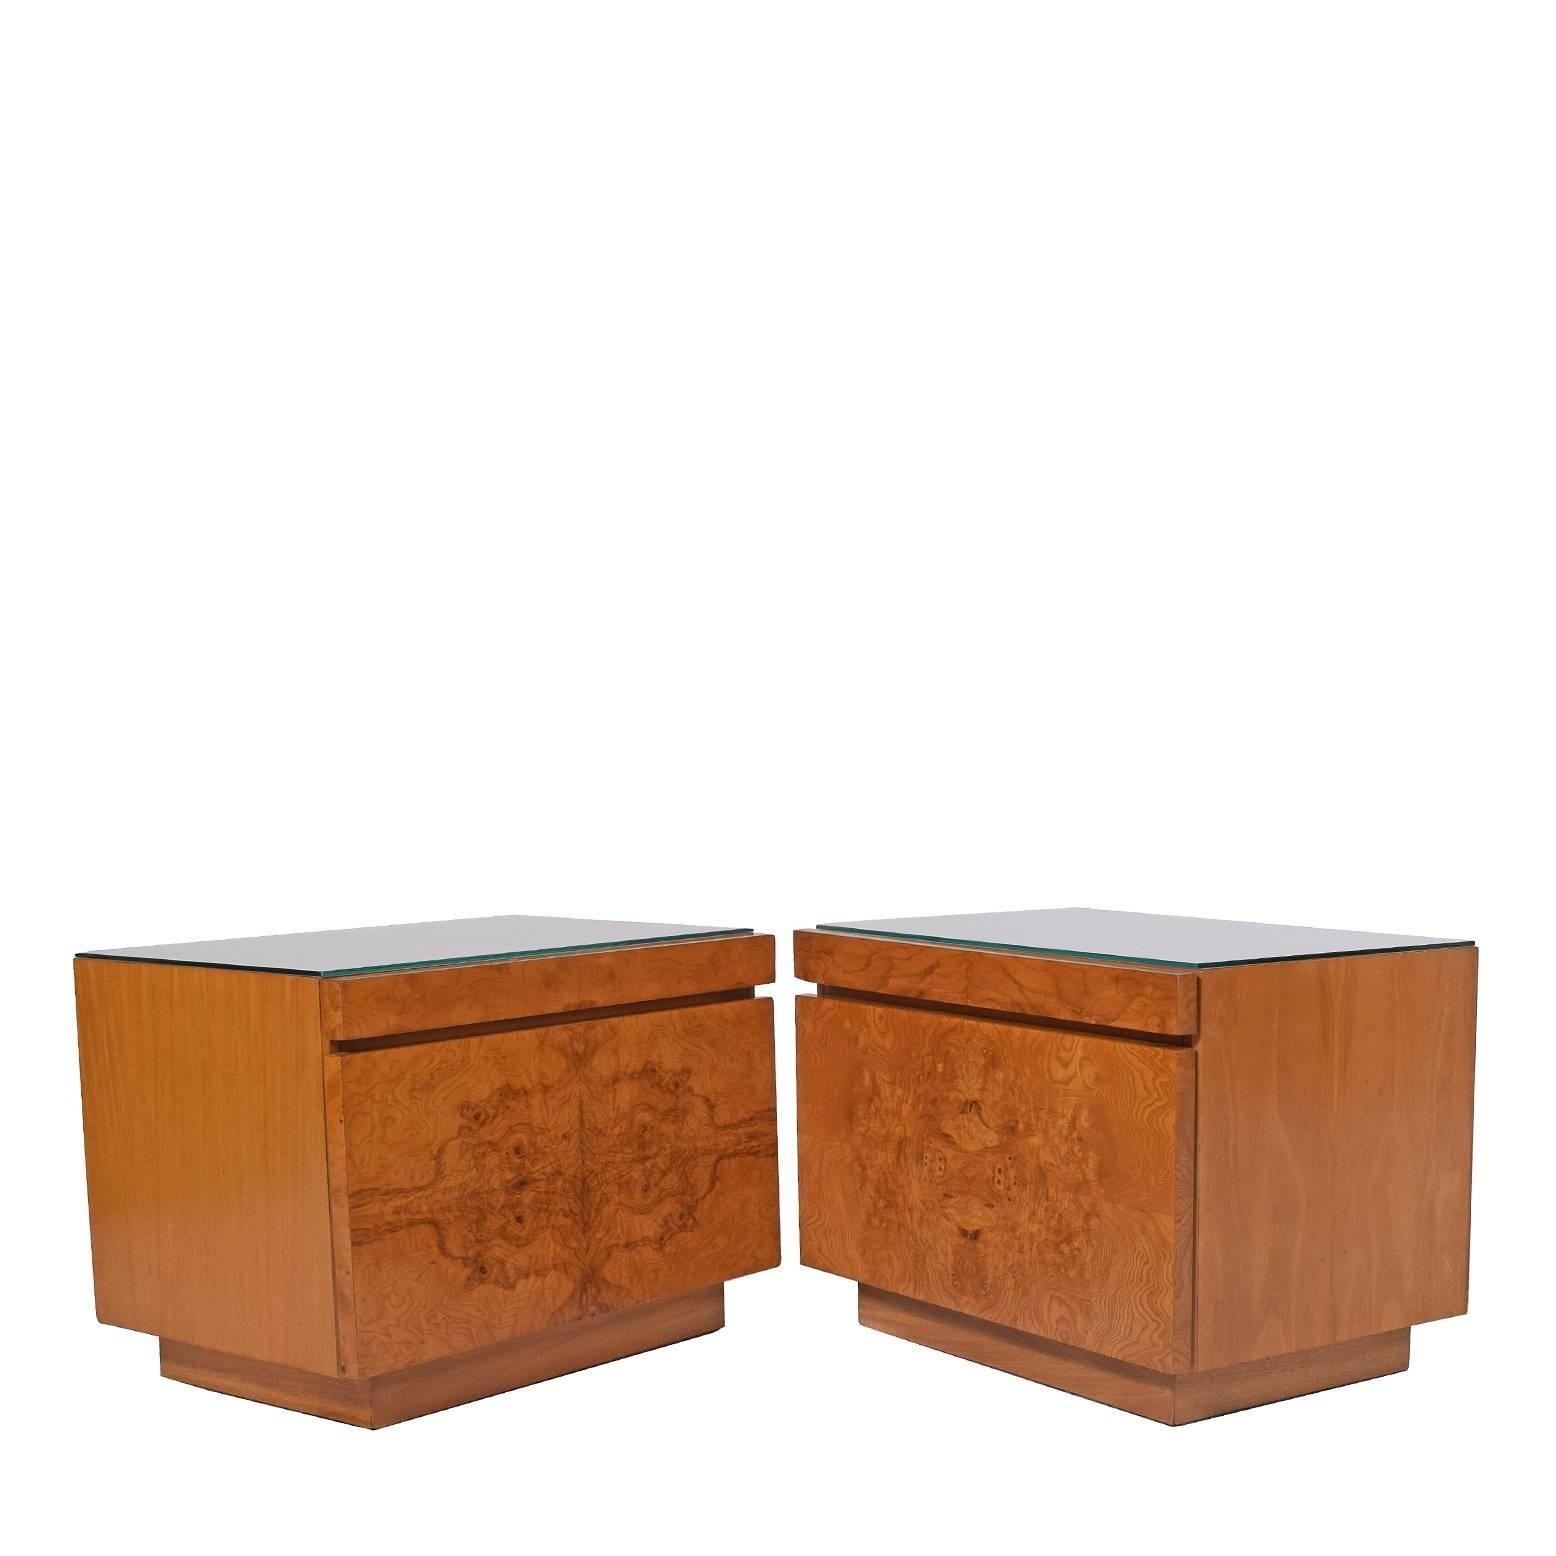 Pair of nightstands featuring burl maple front, one drawer and pull-out shelf in white laminate. Glass tops included.